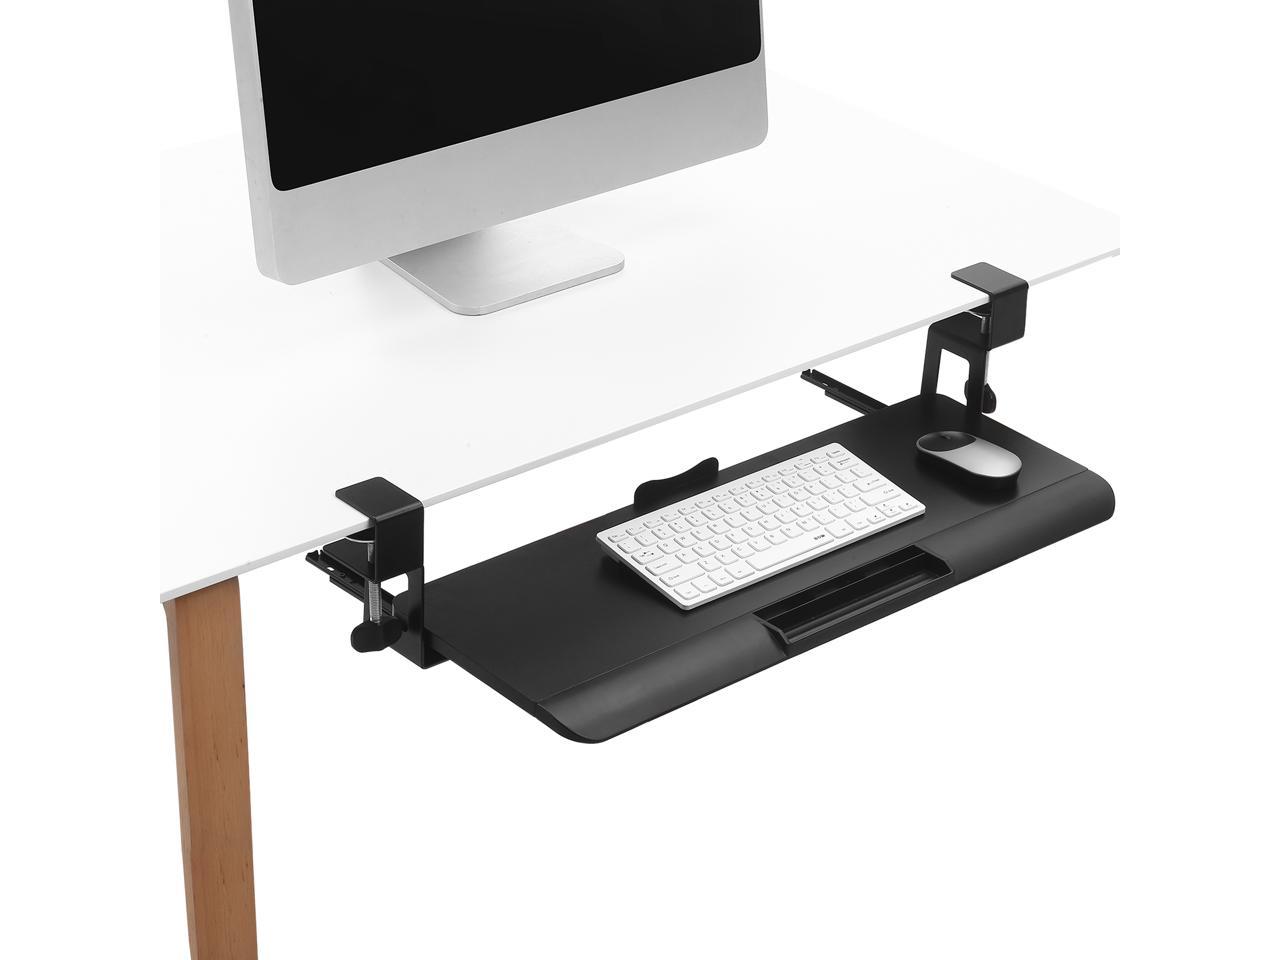 Lanyun Large Keyboard Tray Under Desk Pull Out With Extra Sturdy C Clamp Mount System Black 29 X 9.3 Inch Slide-Out Platform Computer Drawer For Typing And Mouse Work Fits Full Size Keyboard and Mous 